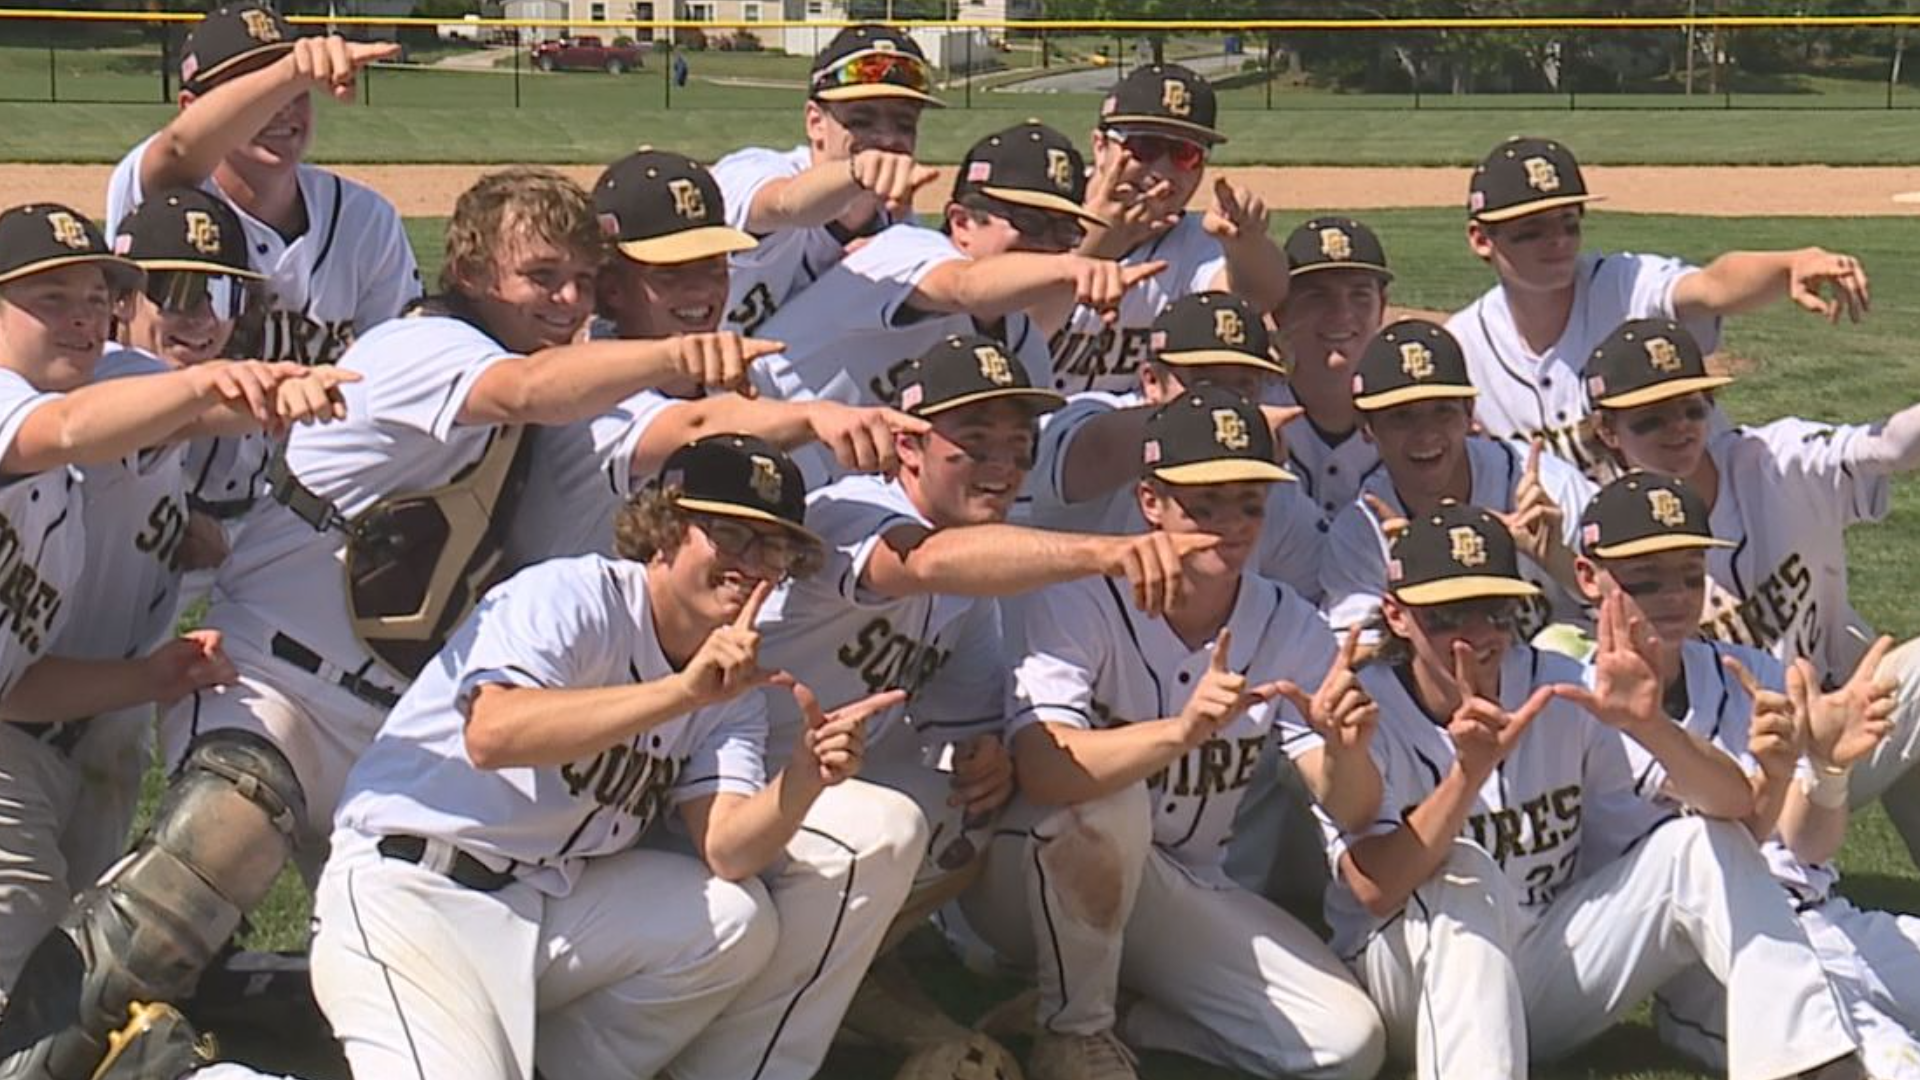 The Squires had little trouble against Schuylkill Haven on Thursday, beating them 9-1 to advance to the PIAA state semifinals.